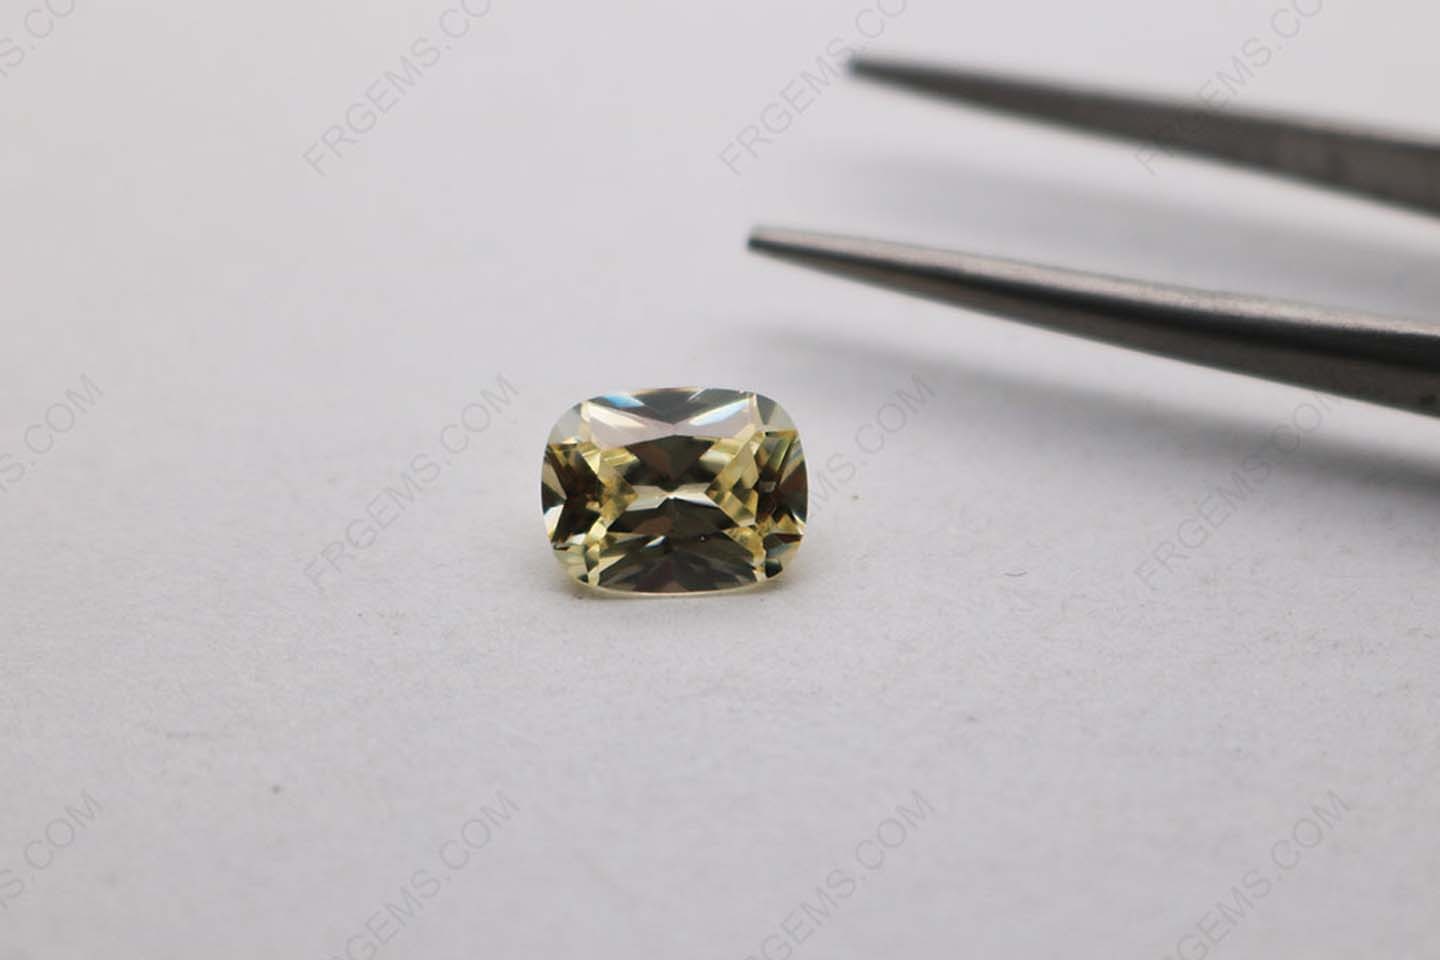 Cubic Zirconia Canary Yellow 3A Rectangle Cushion Shape diamond faceted cut 11x9mm stones CZ06 IMG_3920